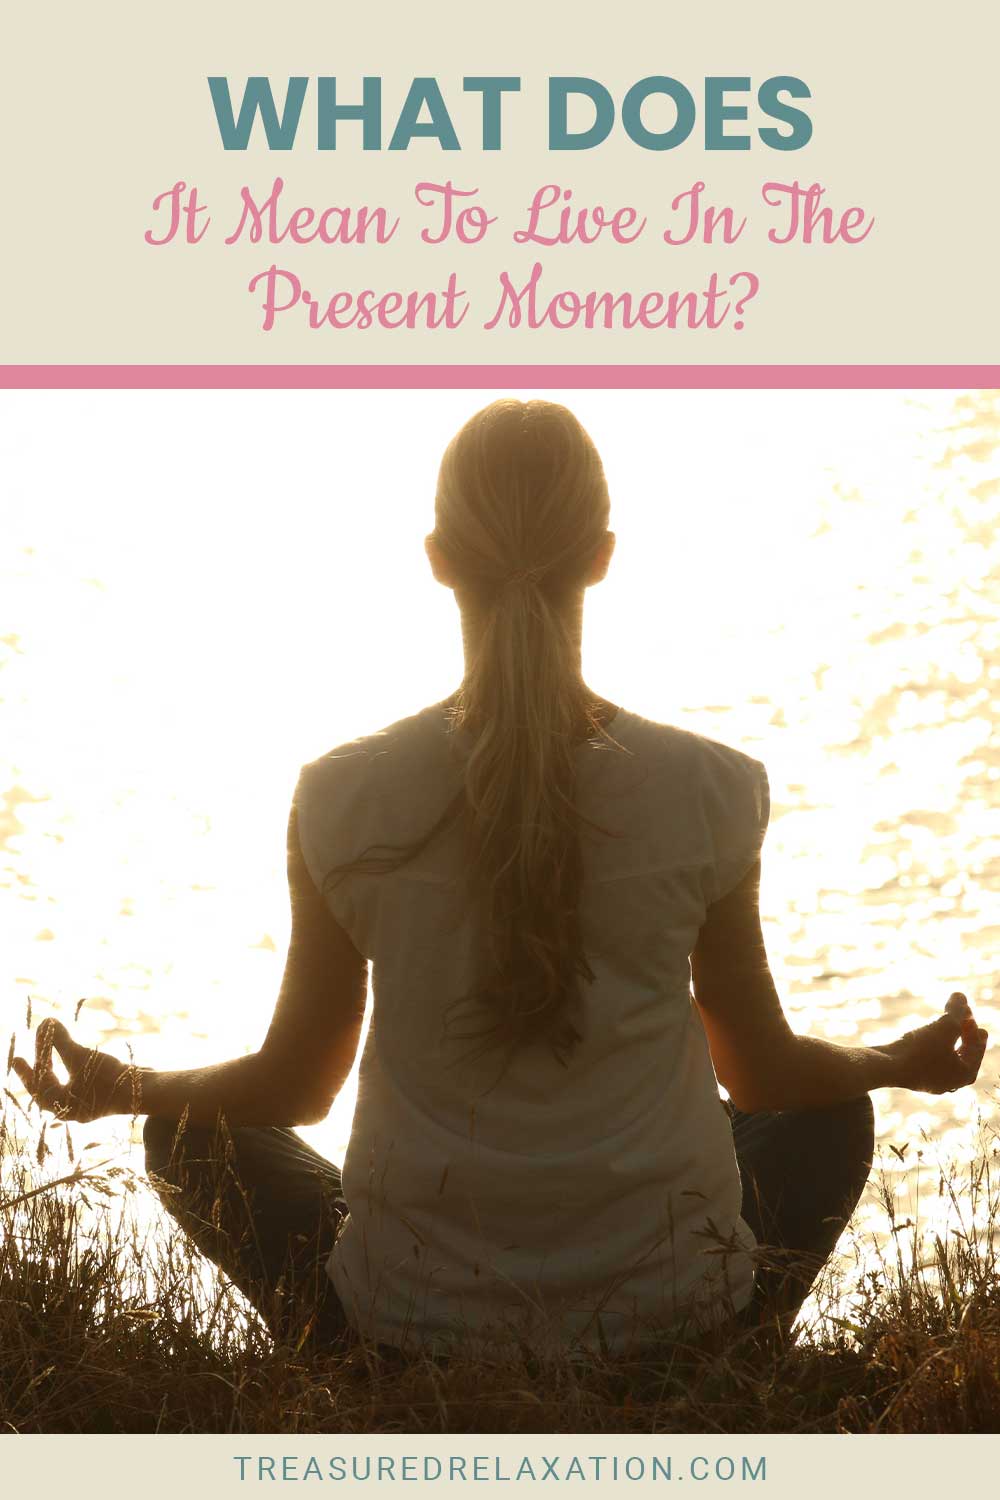 What Does It Mean To Live In The Present Moment?